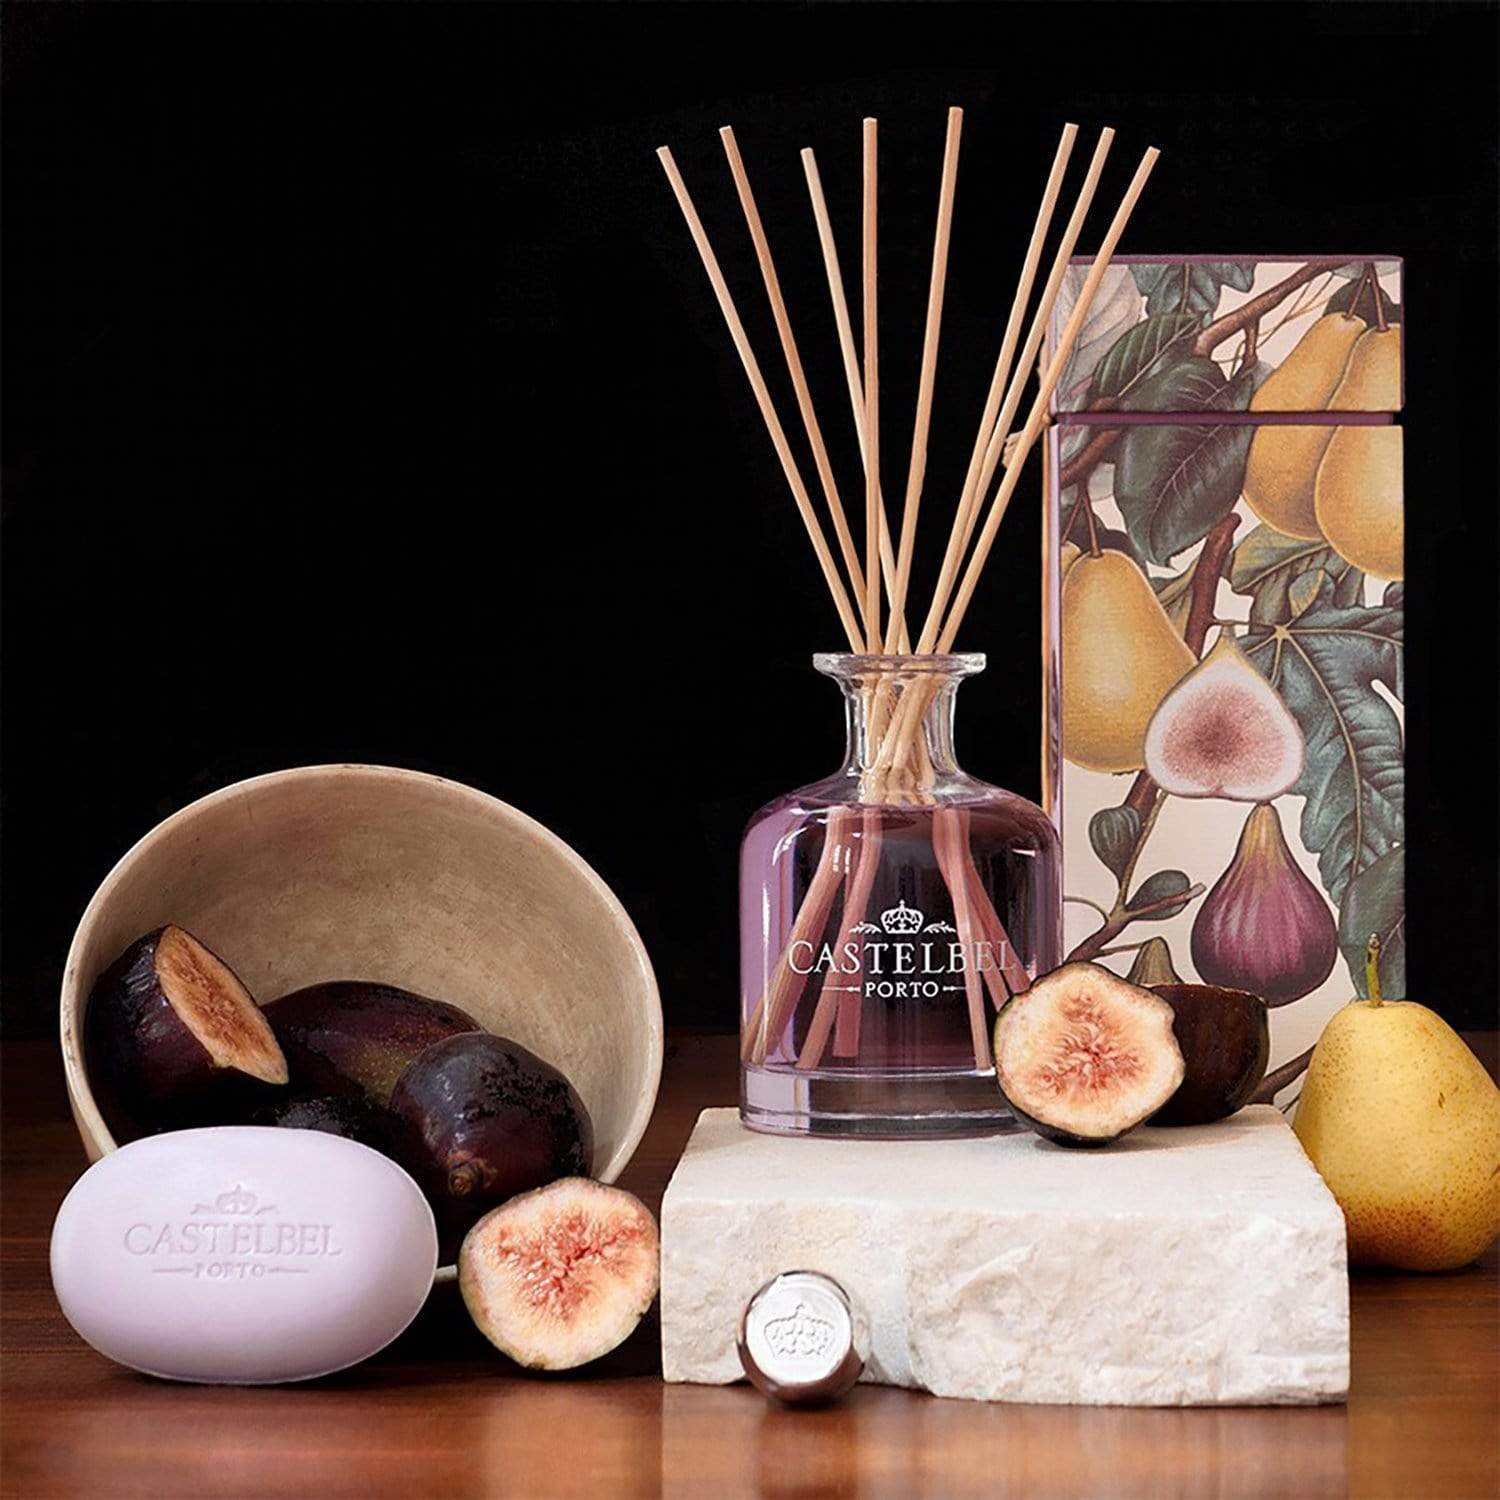 Castelbel Amber Fig and Pear Reed Diffuser - 250ml - C1-0304 - Jashanmal Home